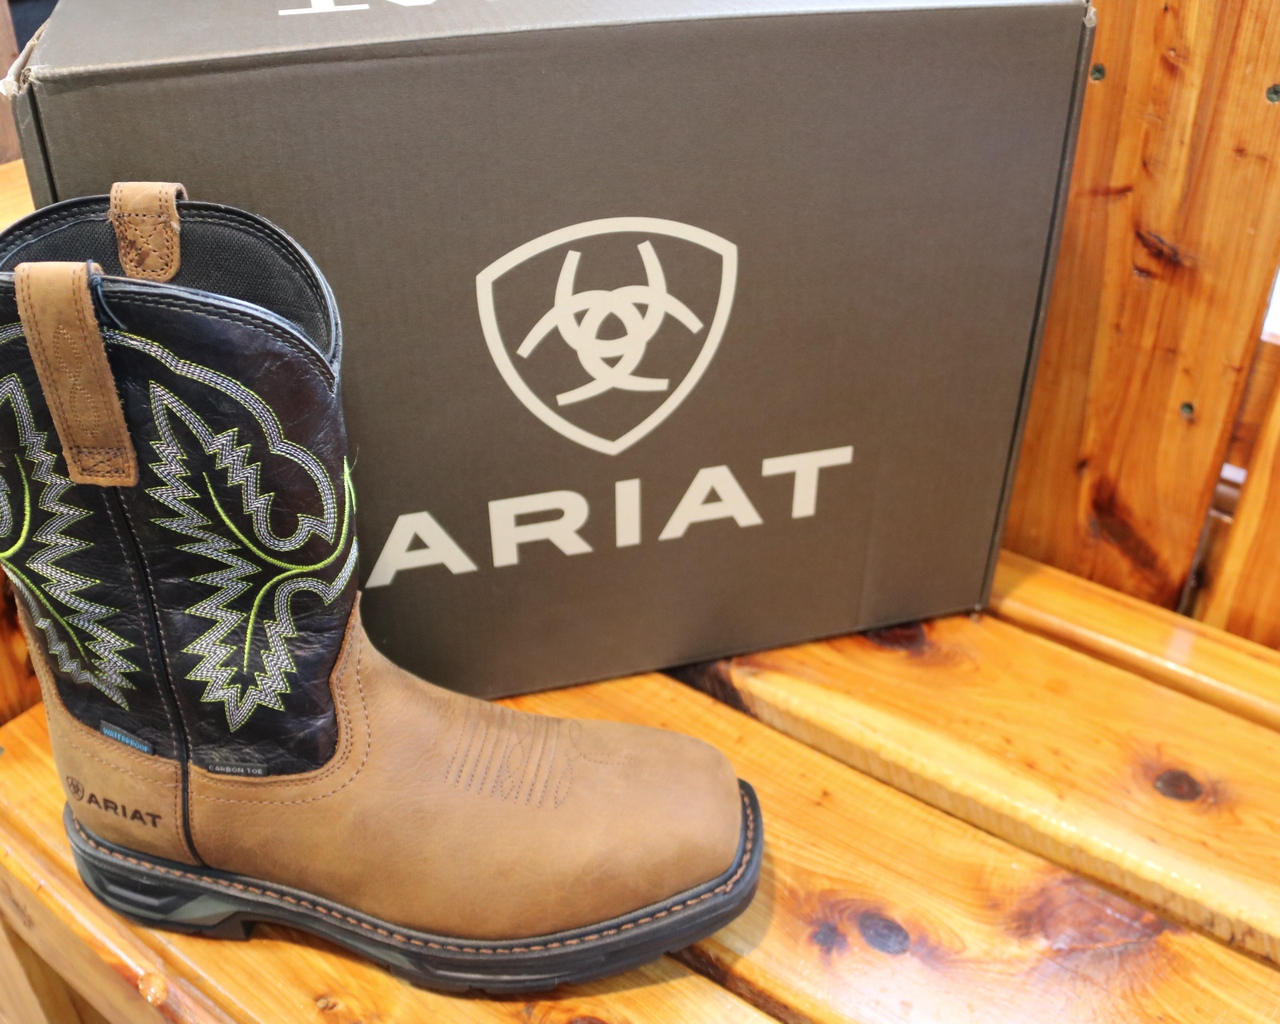 Ariat Boots for Men & Women | Work Boots & More